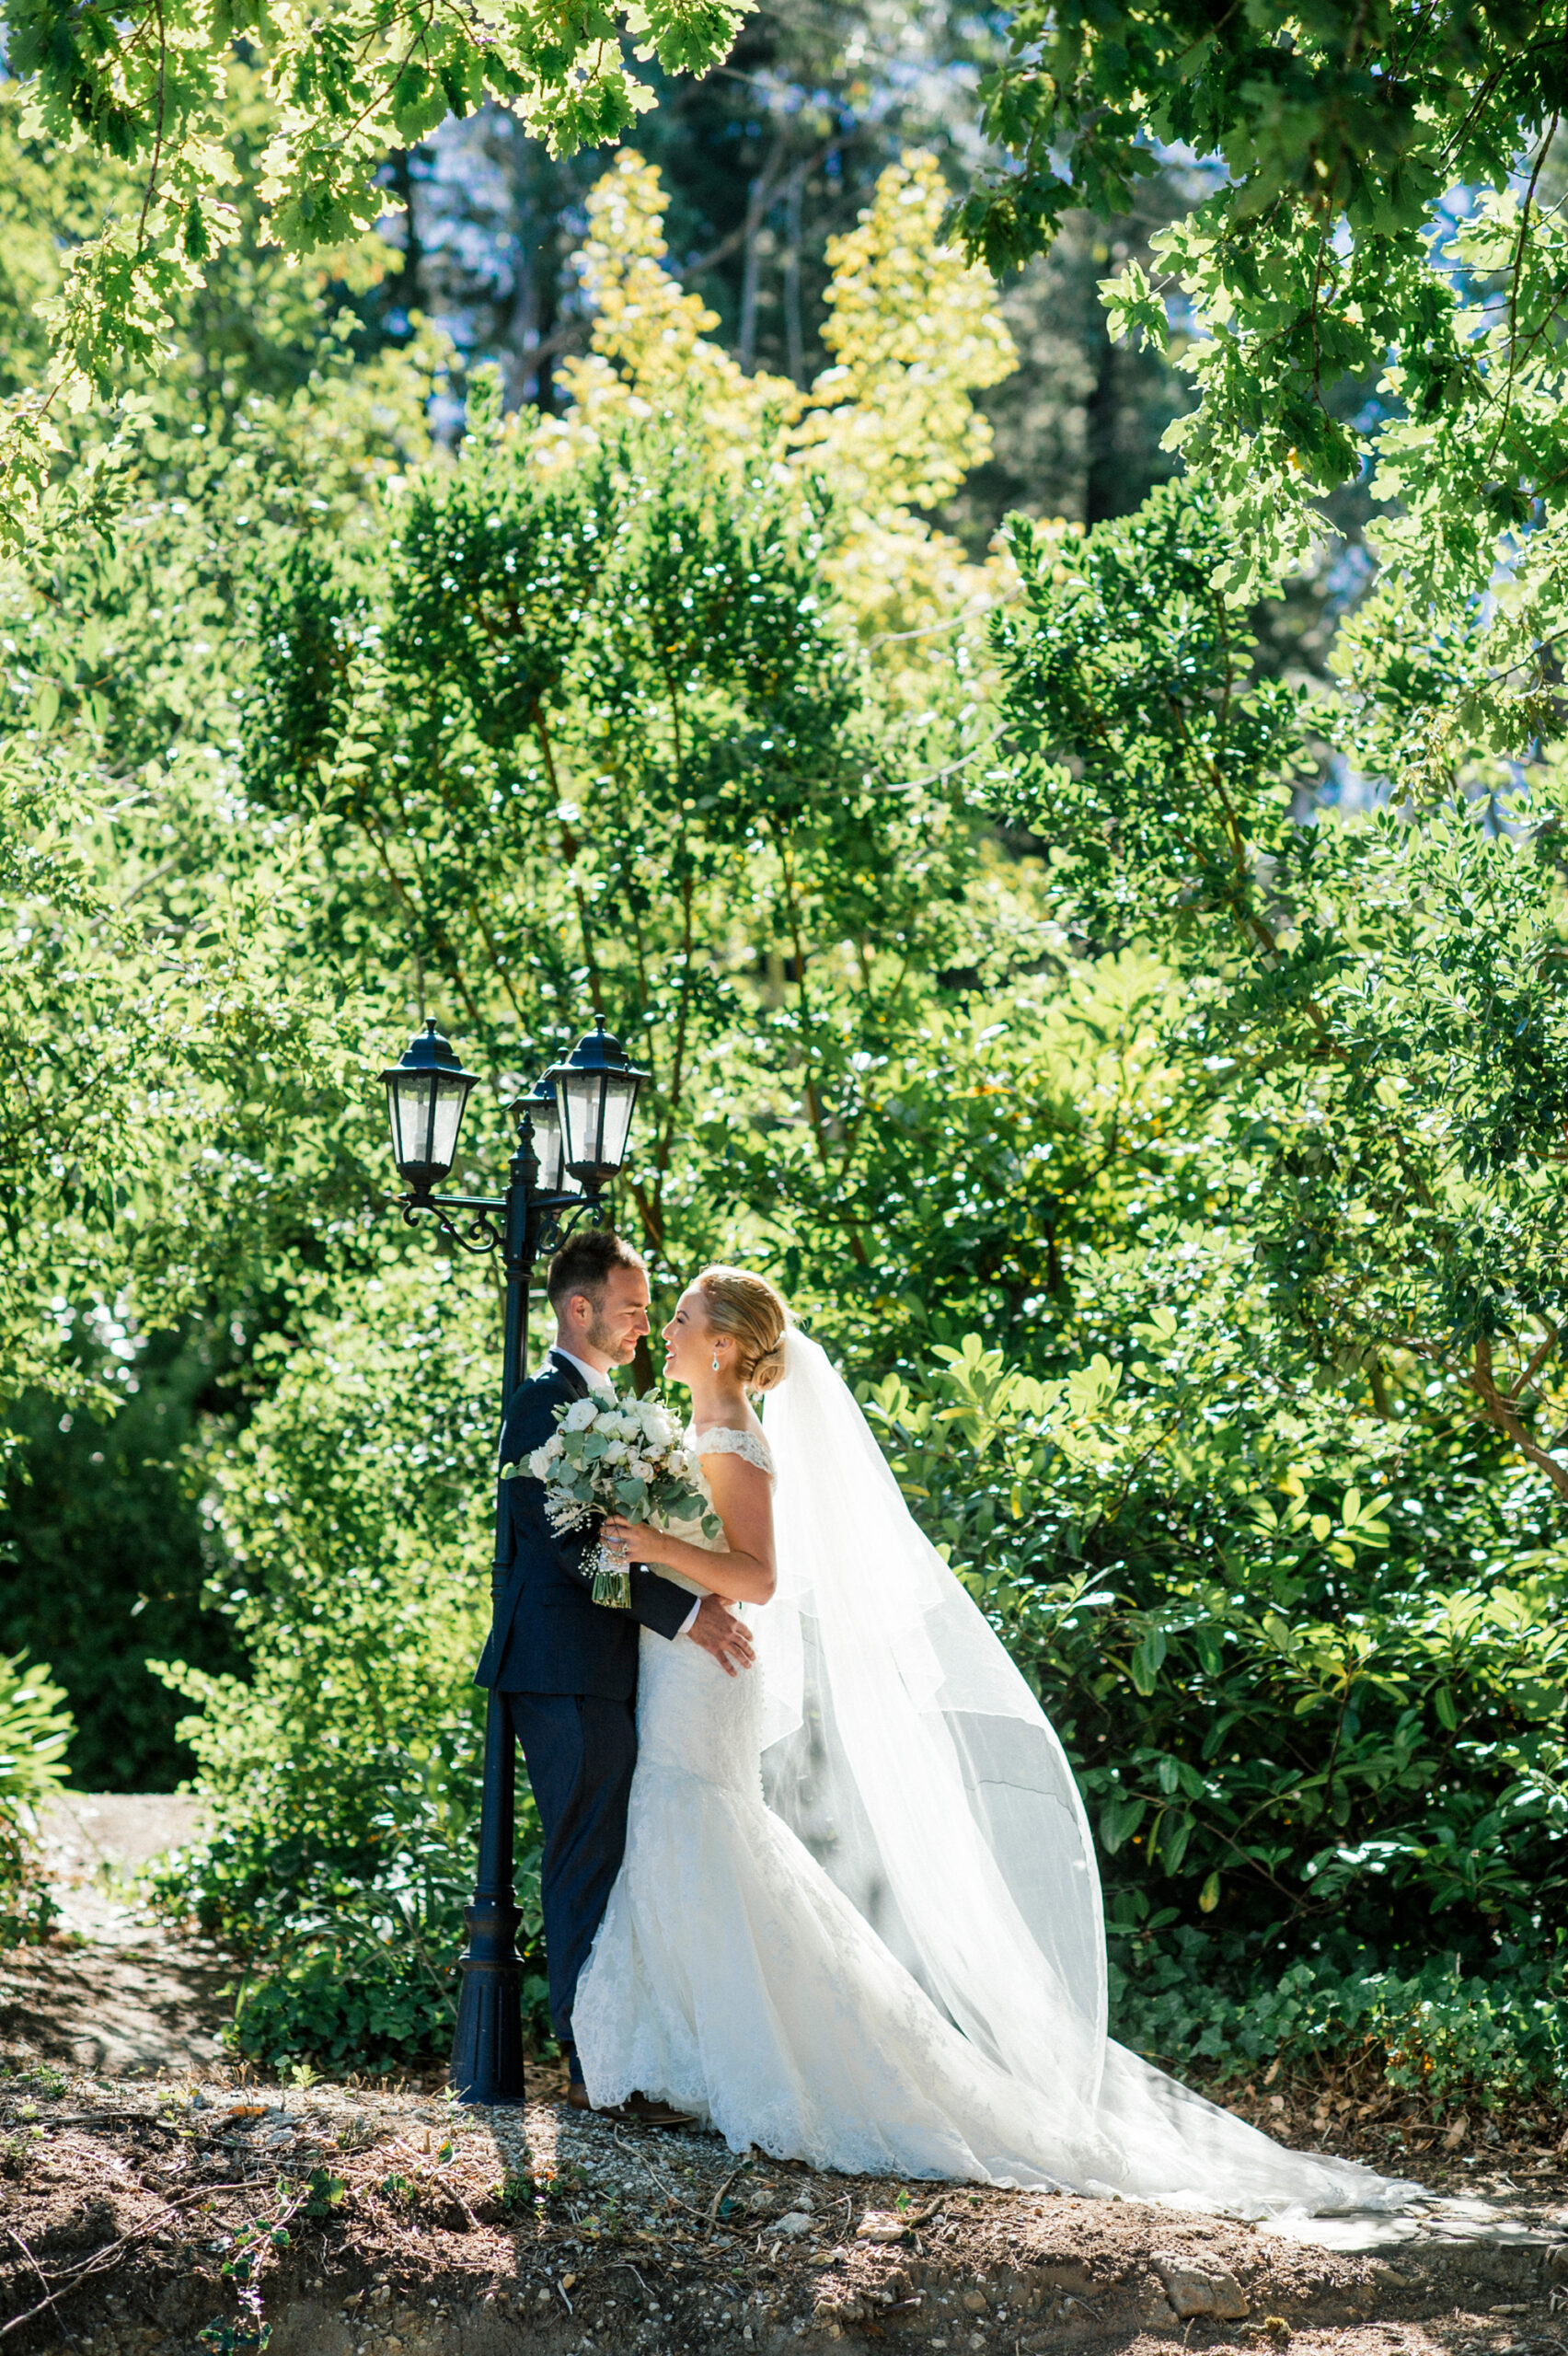 Katie Justin Classic Romantic Wedding Nicholas Purcell Photography 034 scaled